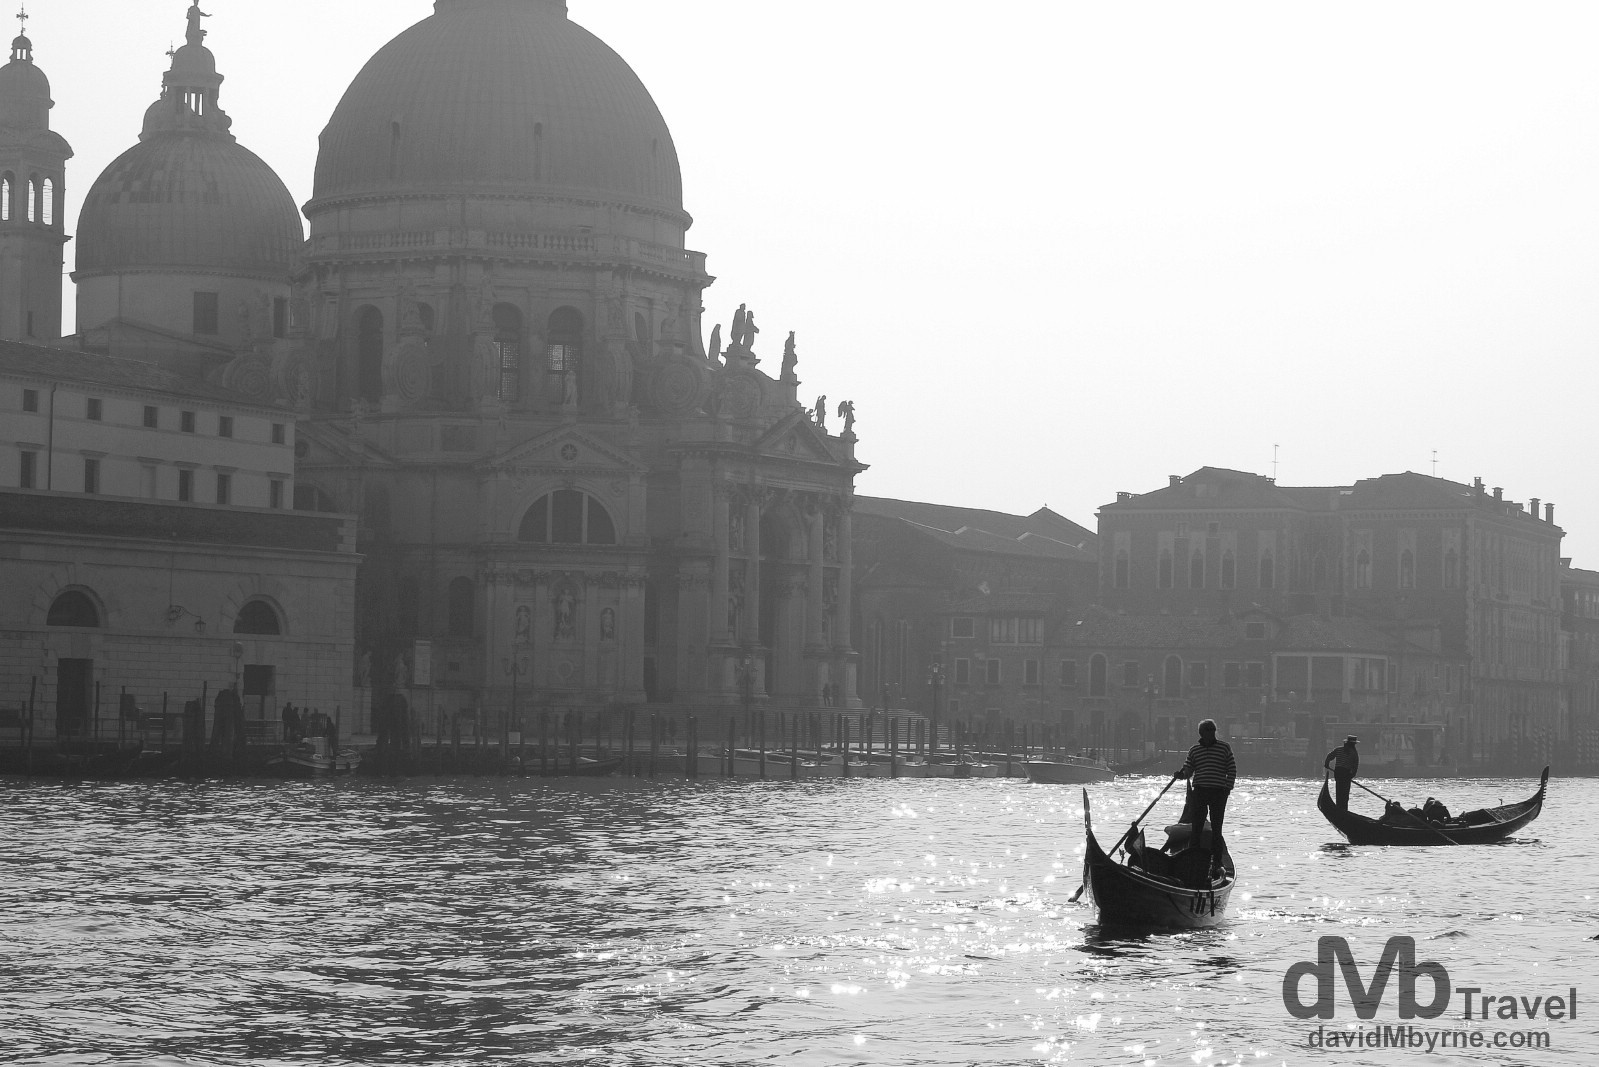 The Grand Canal, Venice, Italy. March 18th, 2014.